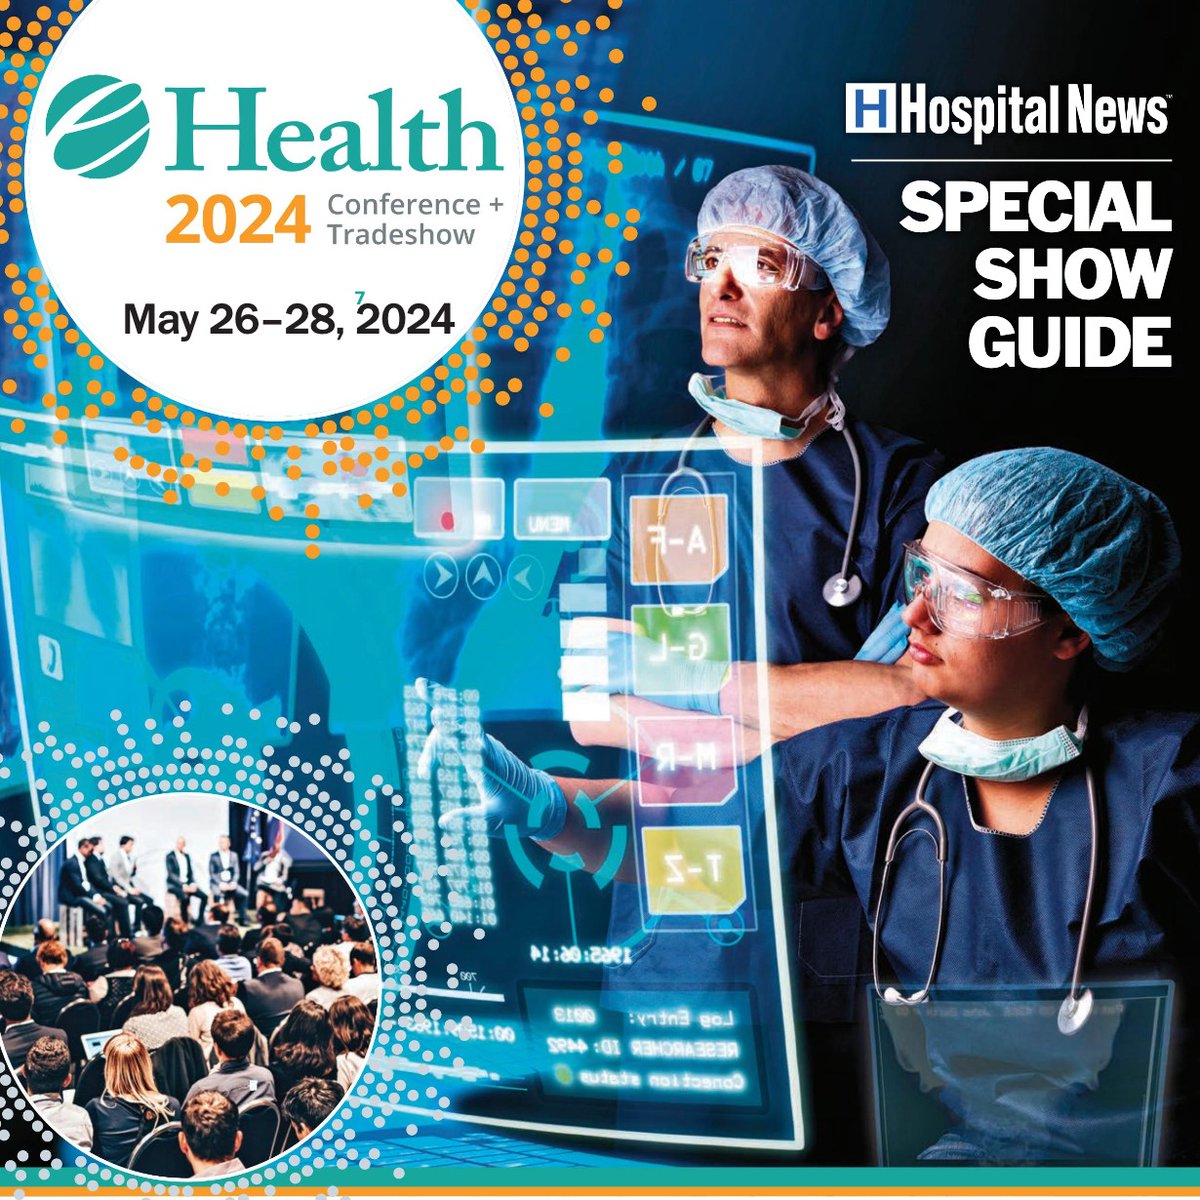 Open the latest edition of @hospitalnewscom for a special #eHealth2024 supplement! ow.ly/glFk50RbK3w